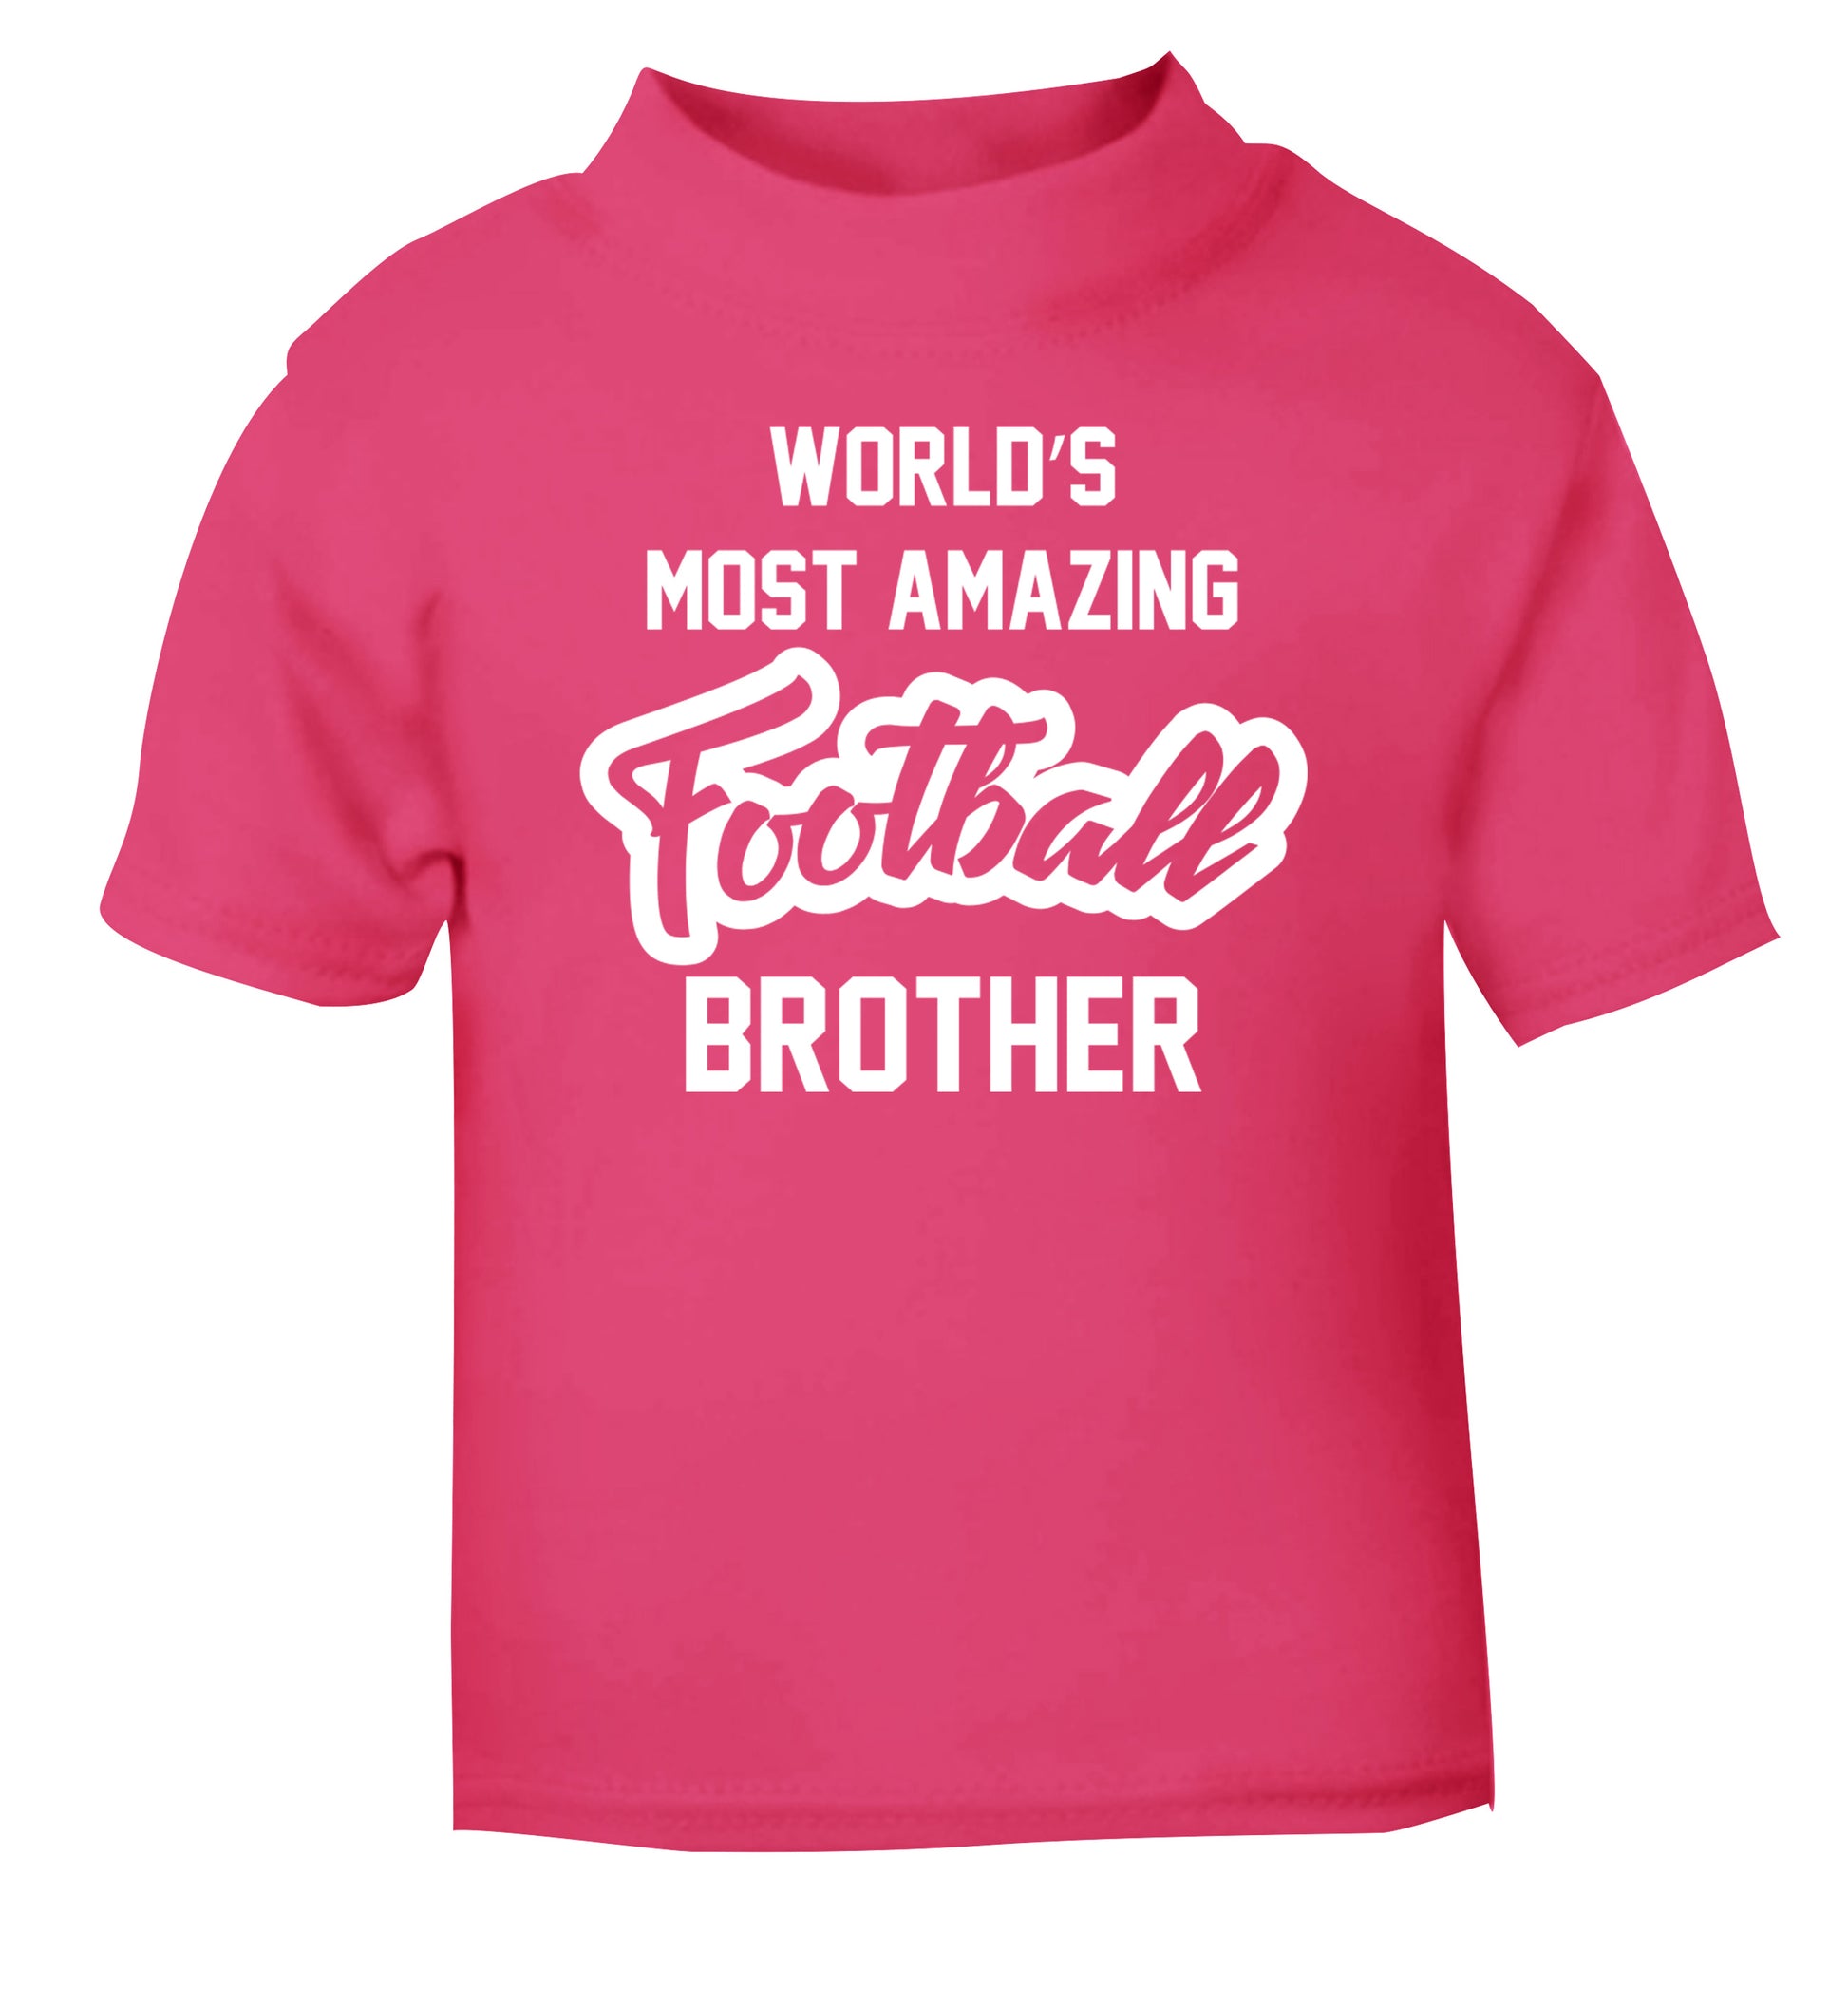 Worlds most amazing football brother pink Baby Toddler Tshirt 2 Years